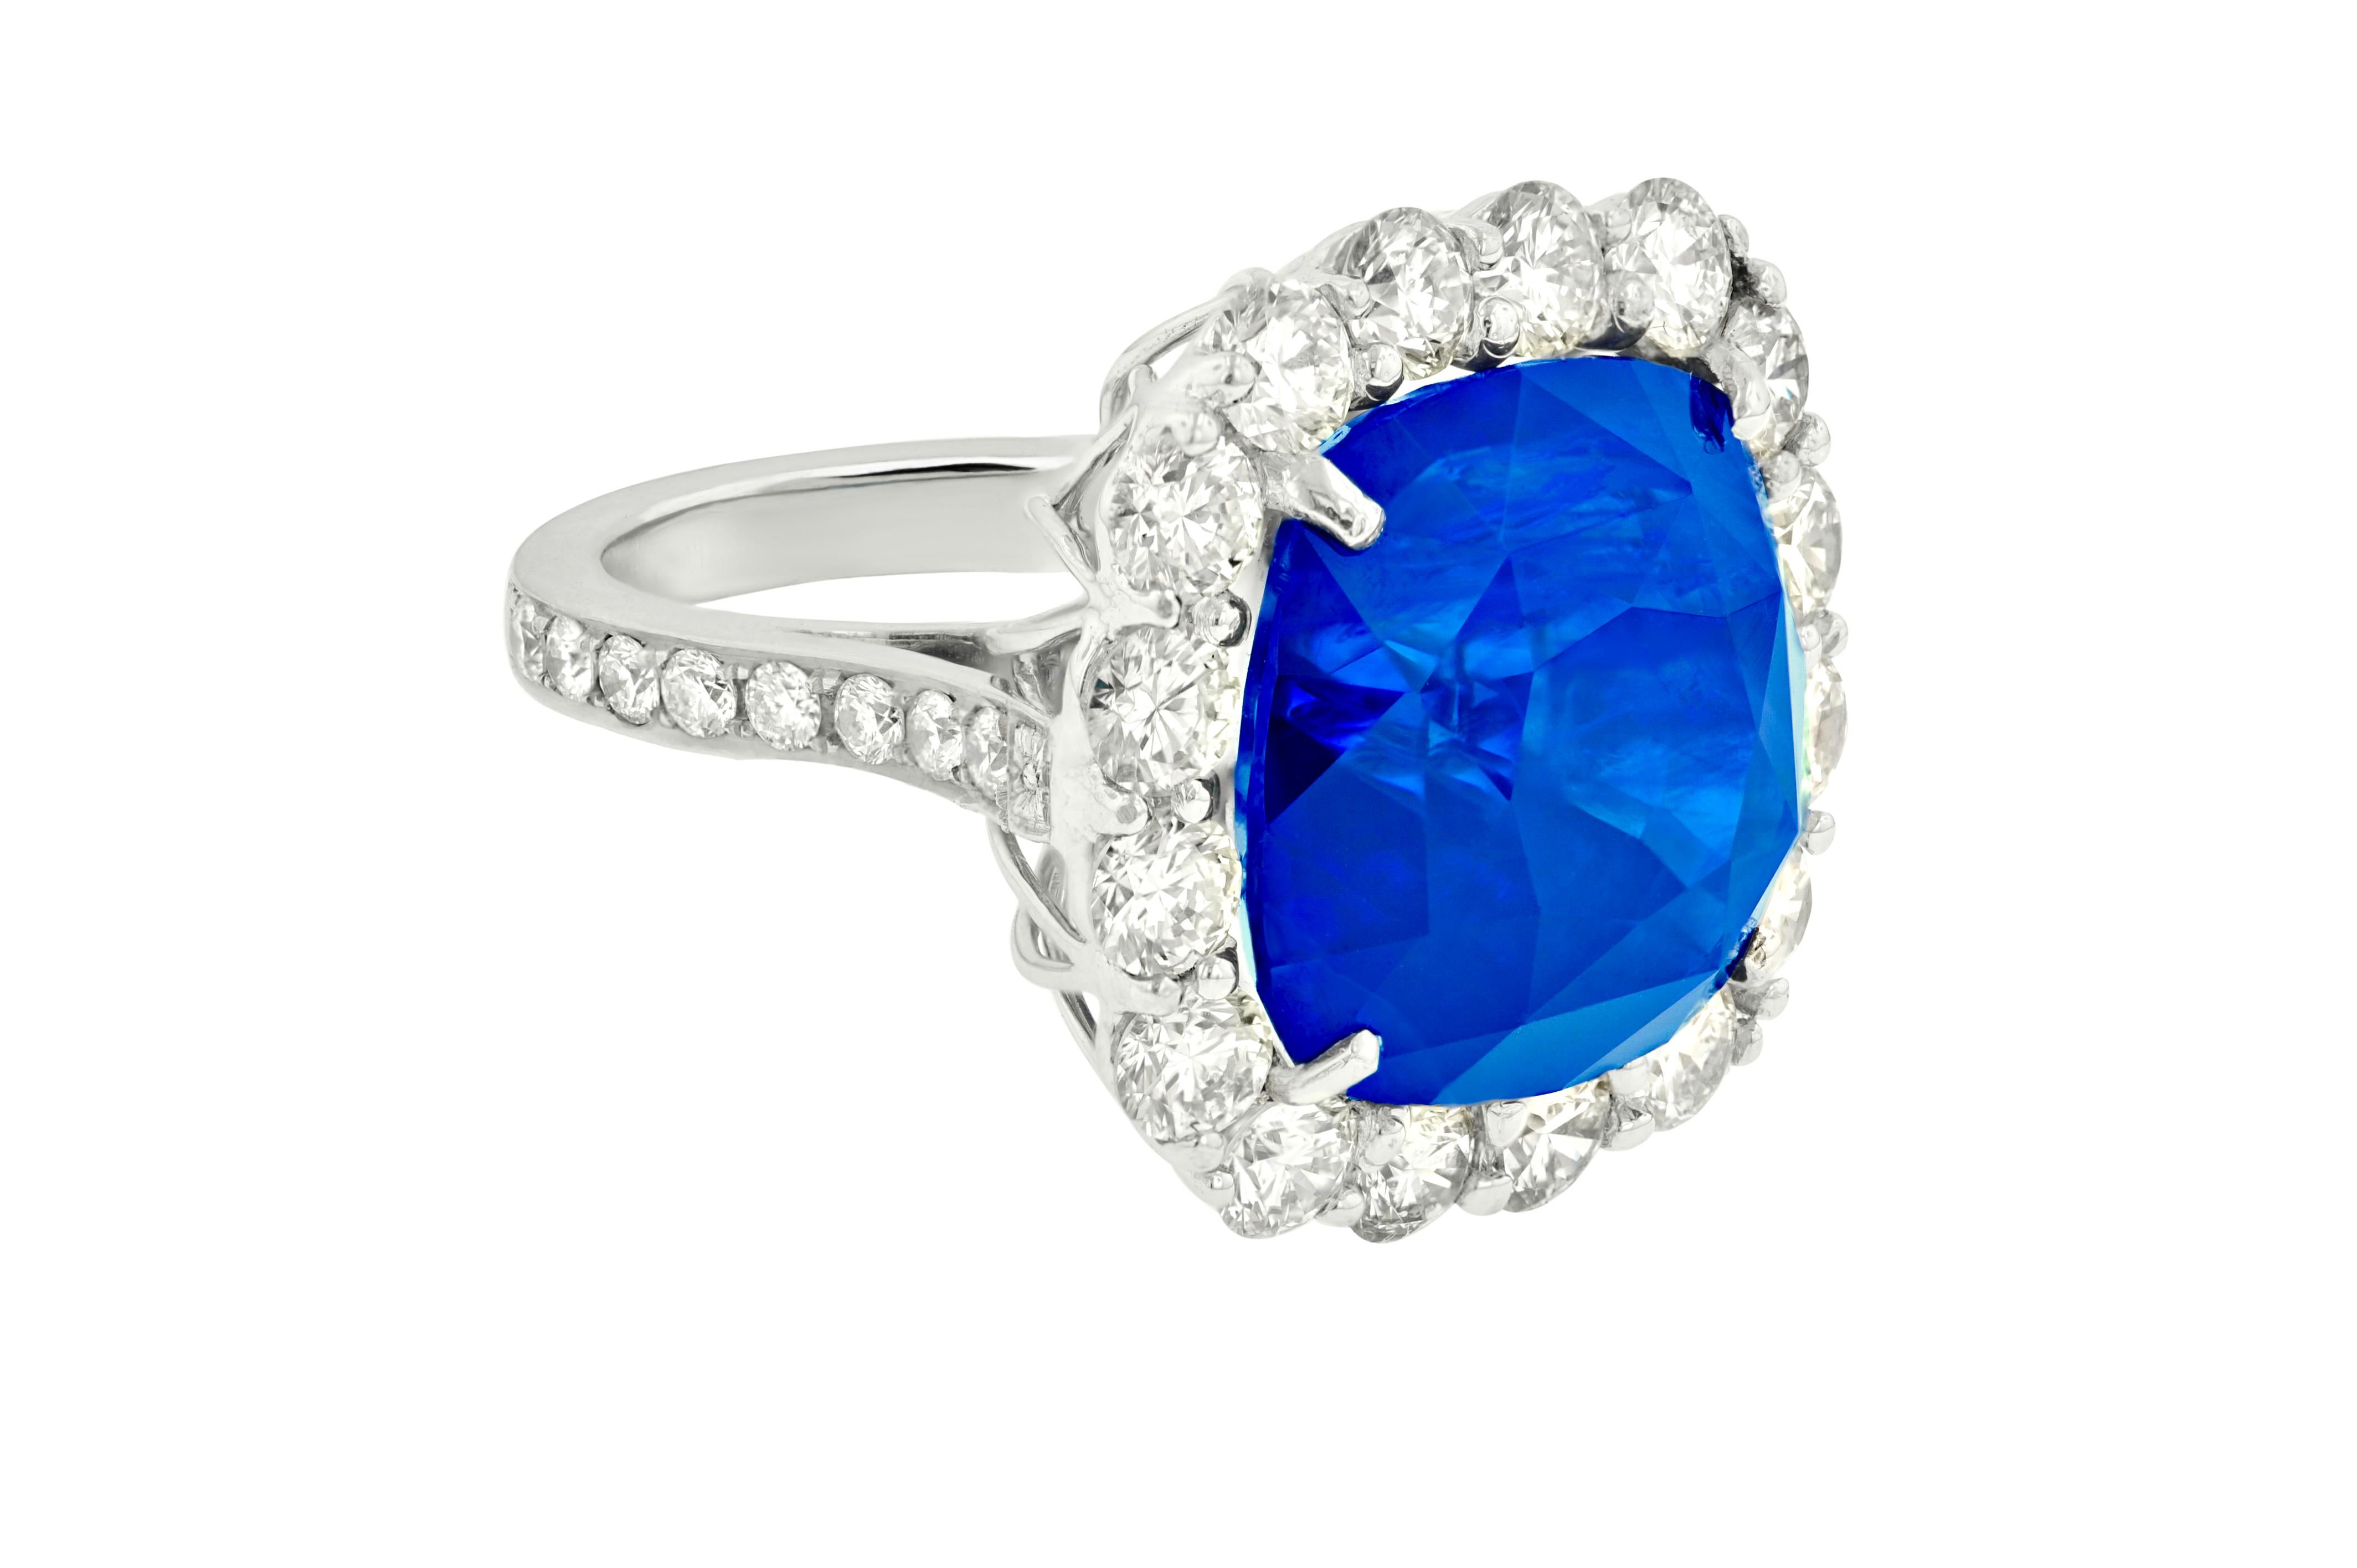 Classic sapphire diamond ring with gia certified sri lanka blue cushion shape sapphire (37.48ct) set with round diamonds (5.35ct) all the way around center and three quarters of the way around the band in platinum setting.
